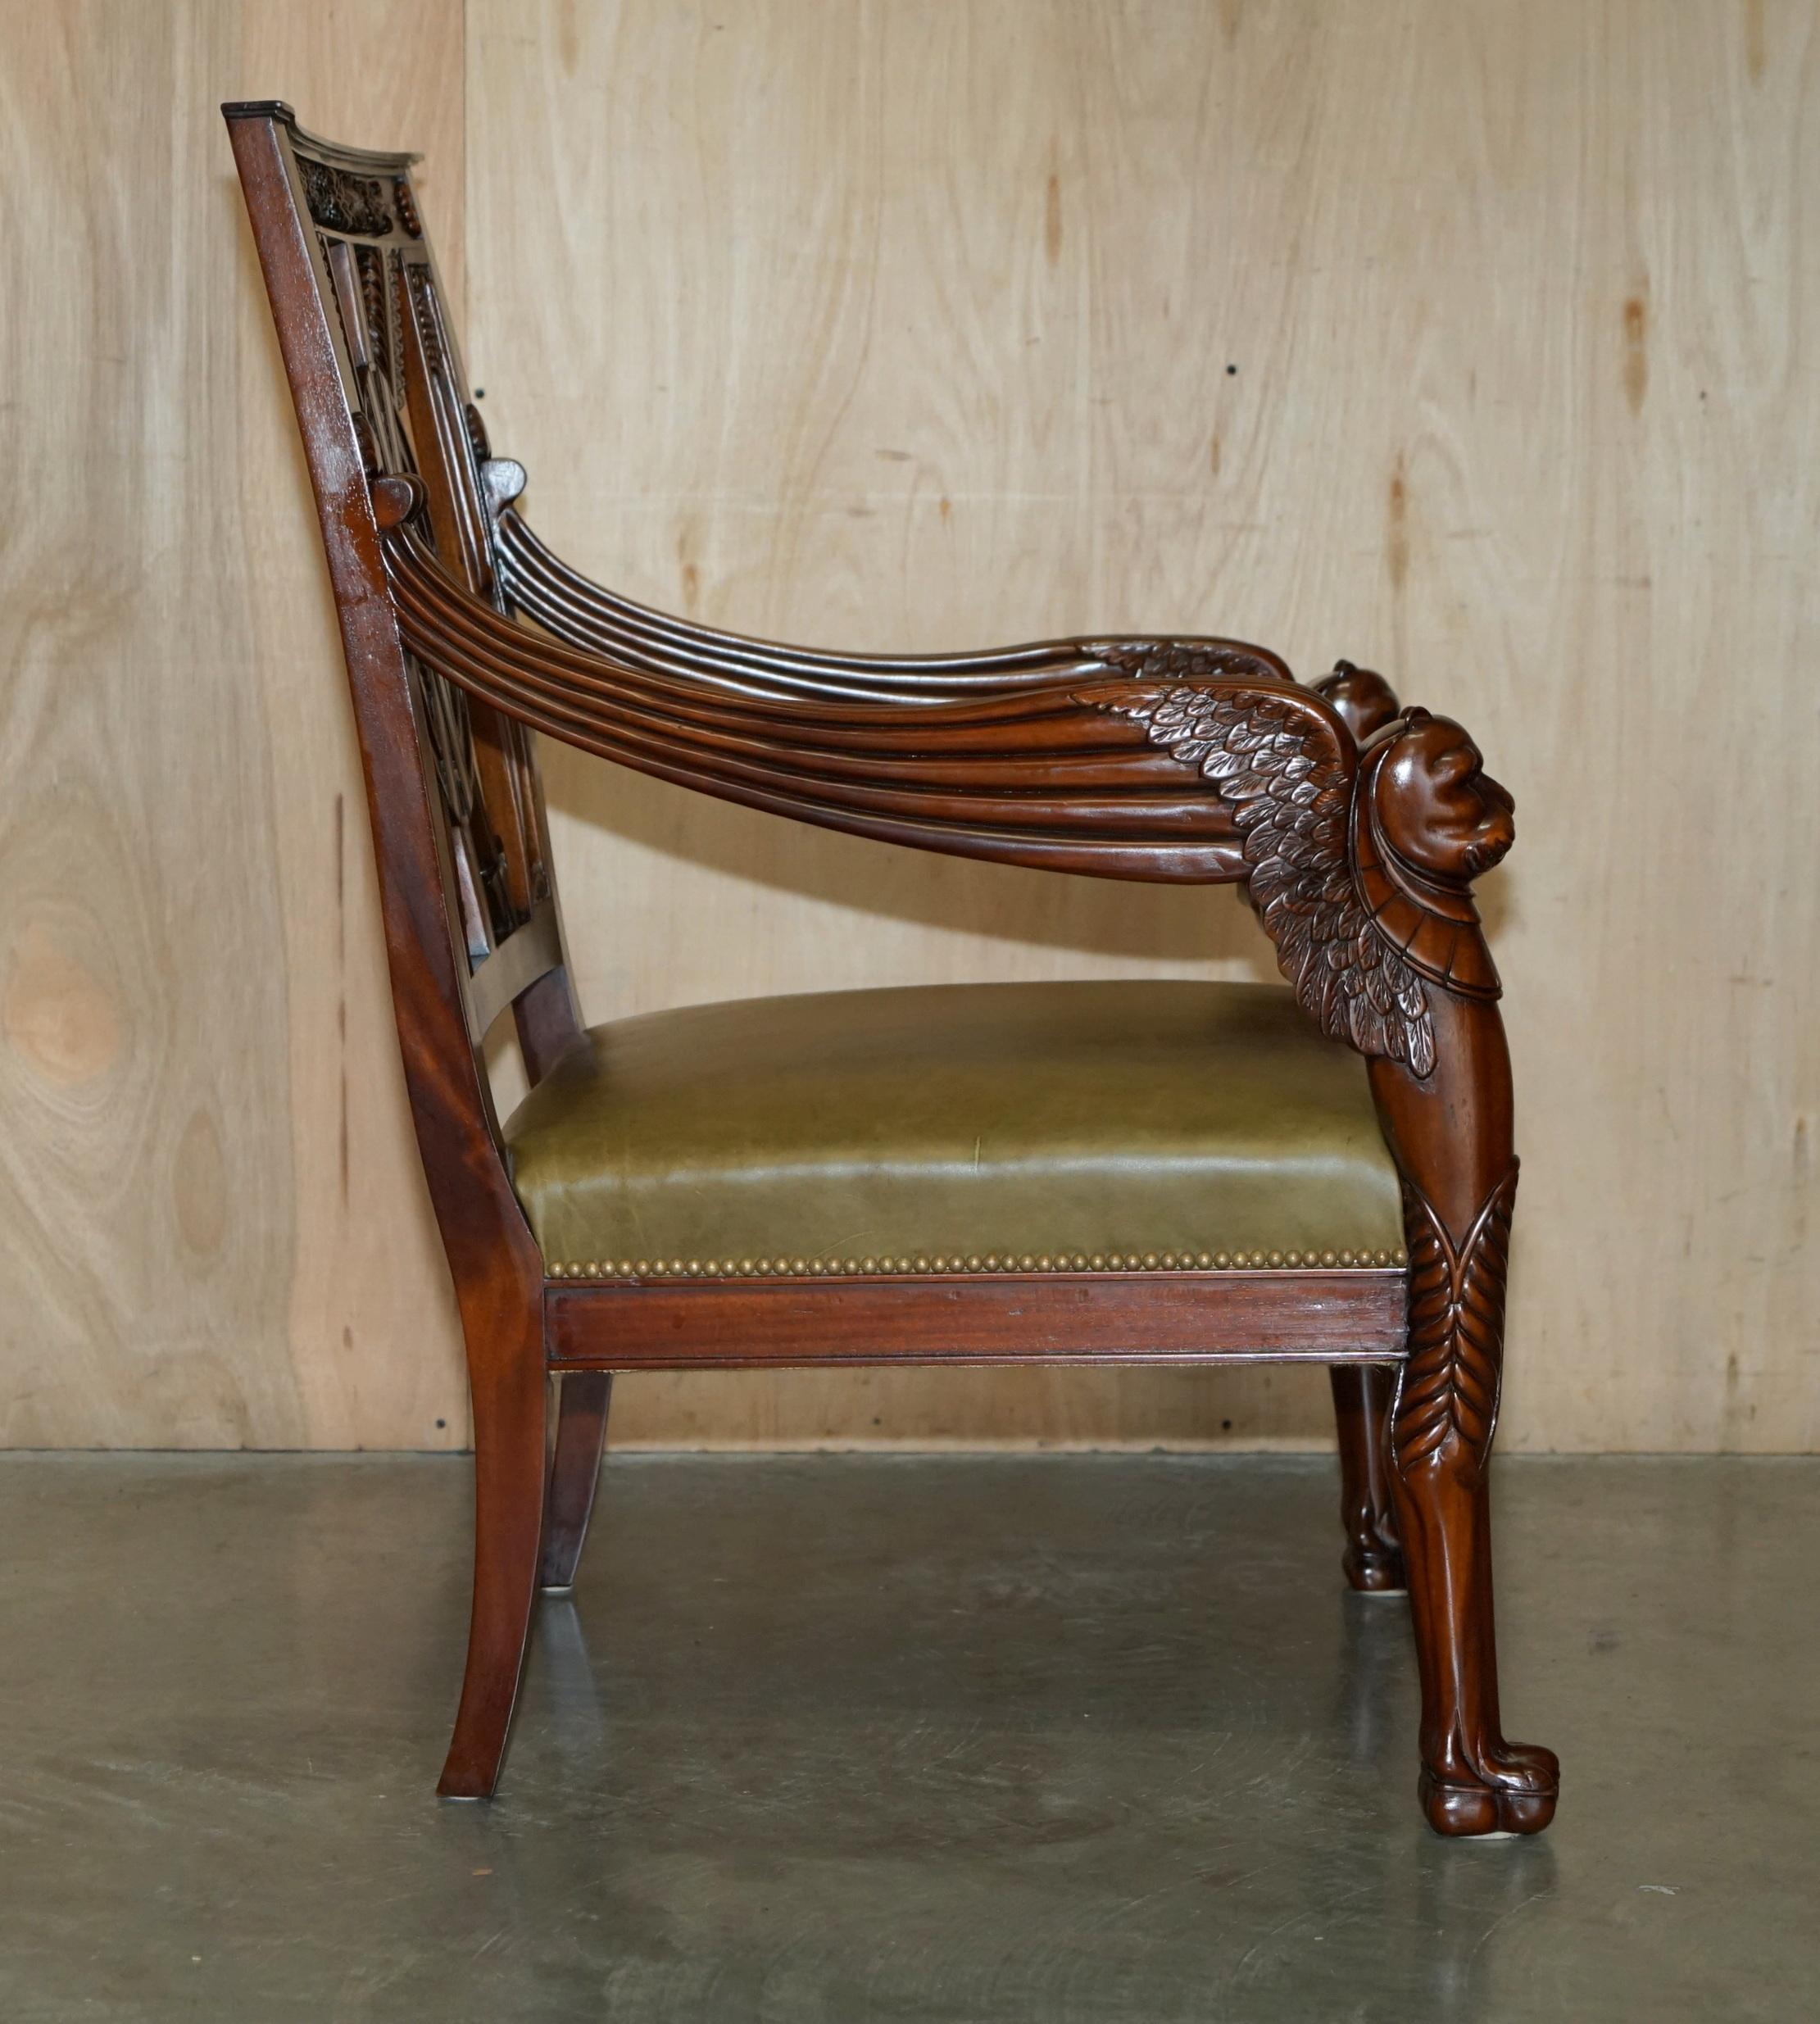 EXQUISITE PAIR OF HAND CARved HARDWOOD LiBRARY ARMCHAIRS LION GRIFFON WING ARMS im Angebot 8